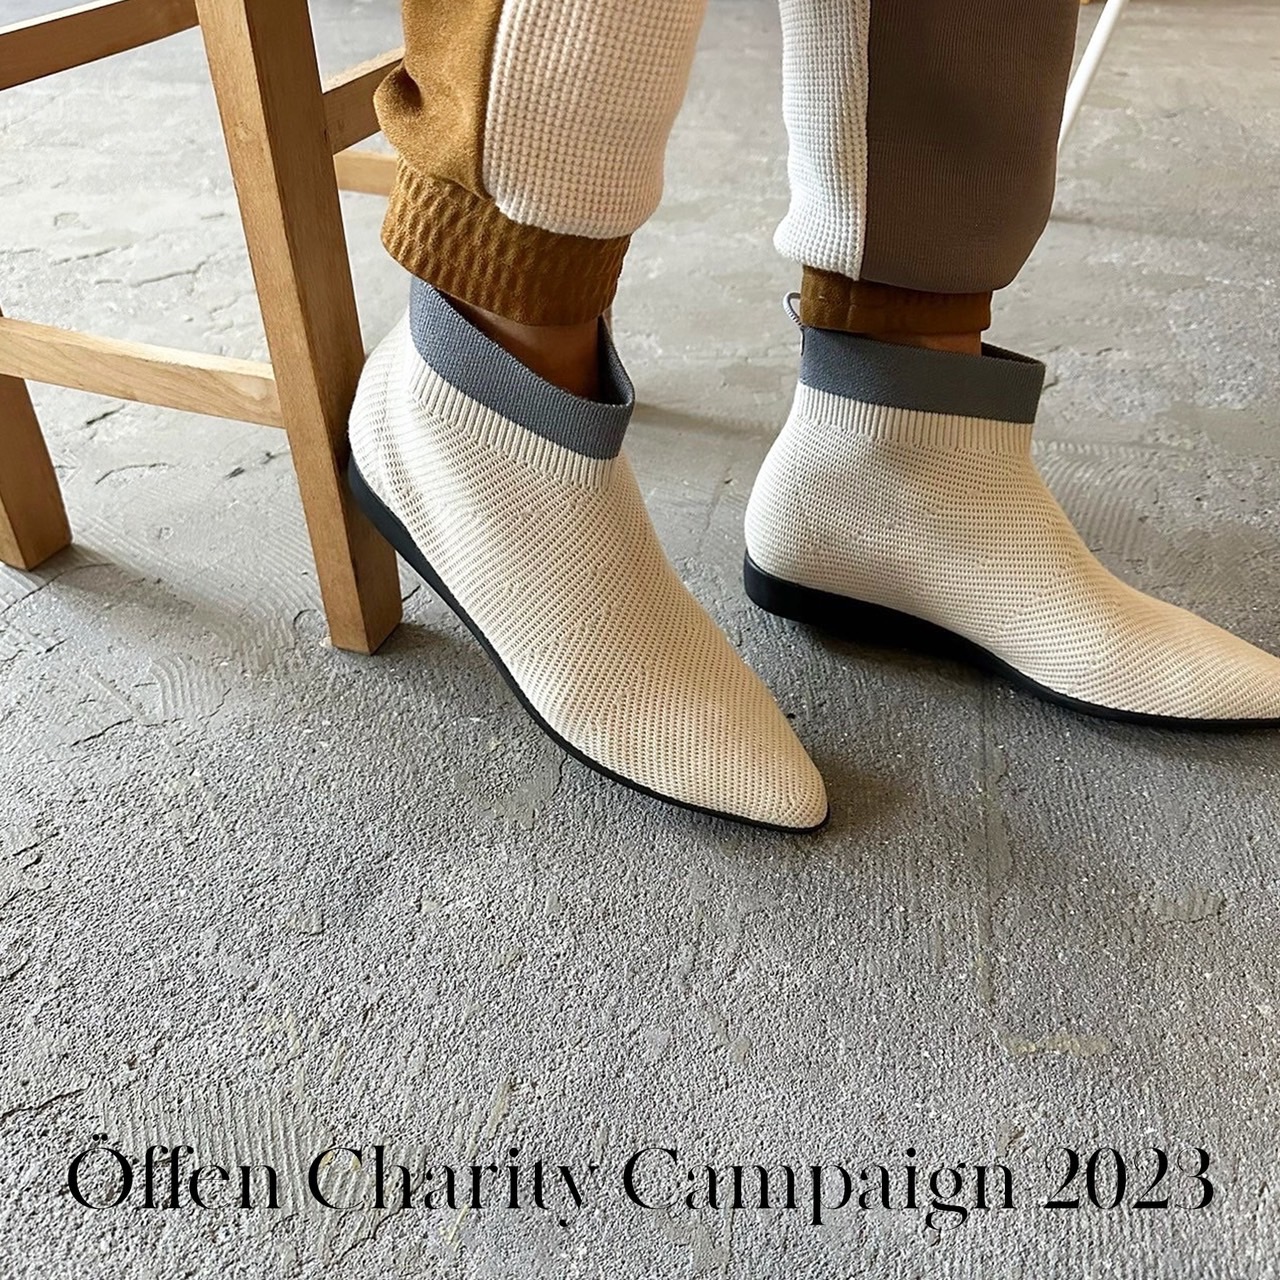 Öffen Charity Campaign 2023